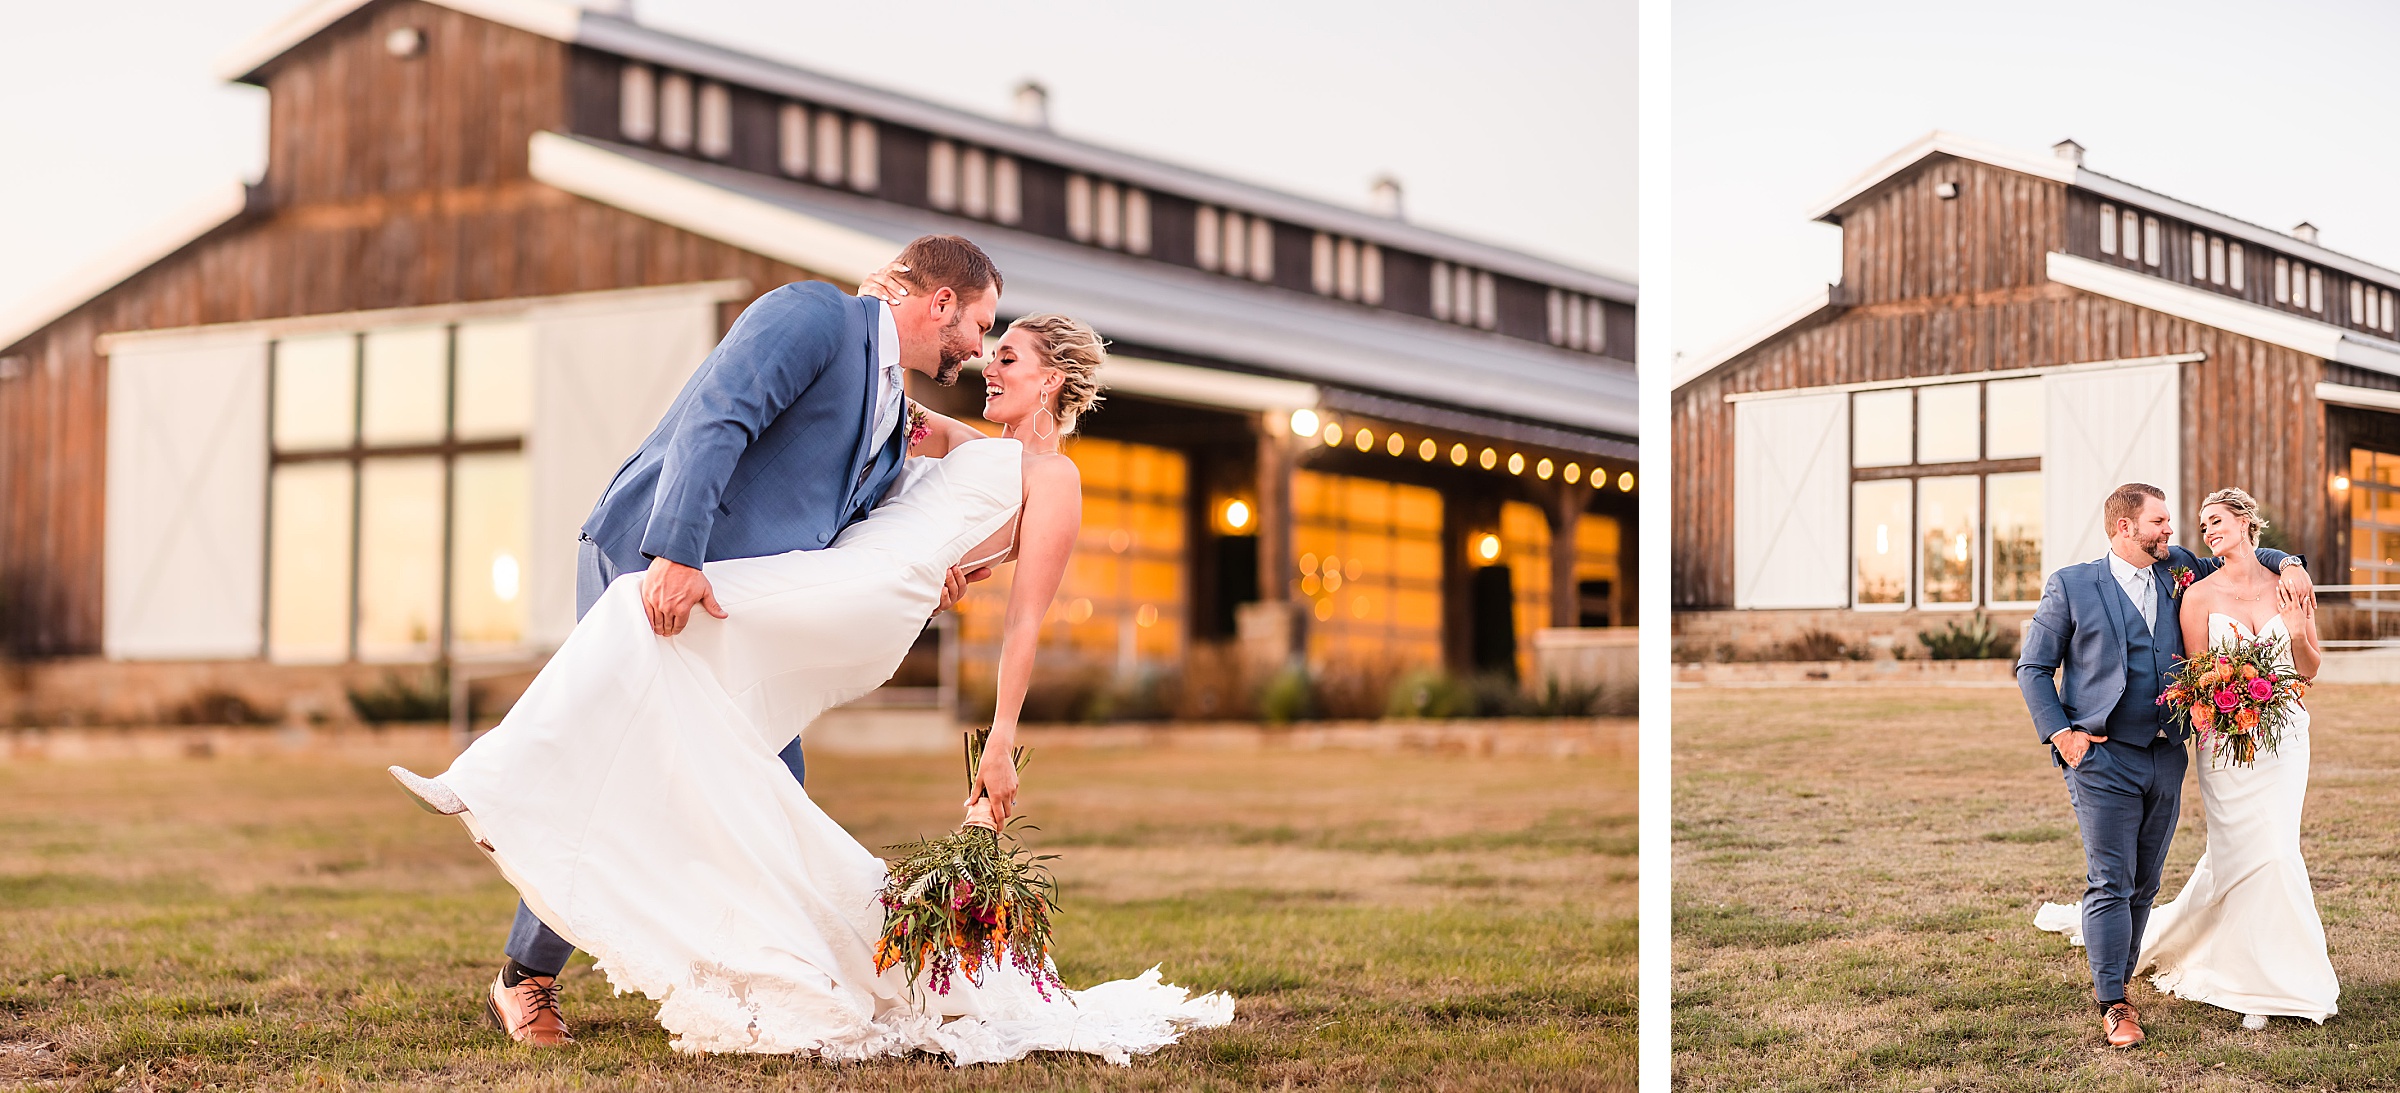 Bride and groom at the Camp Hideaway Retreat wedding venue in Fredericksburg, Texas. Photograph taken by Austin wedding photographers, Joanna and Brett Photography.